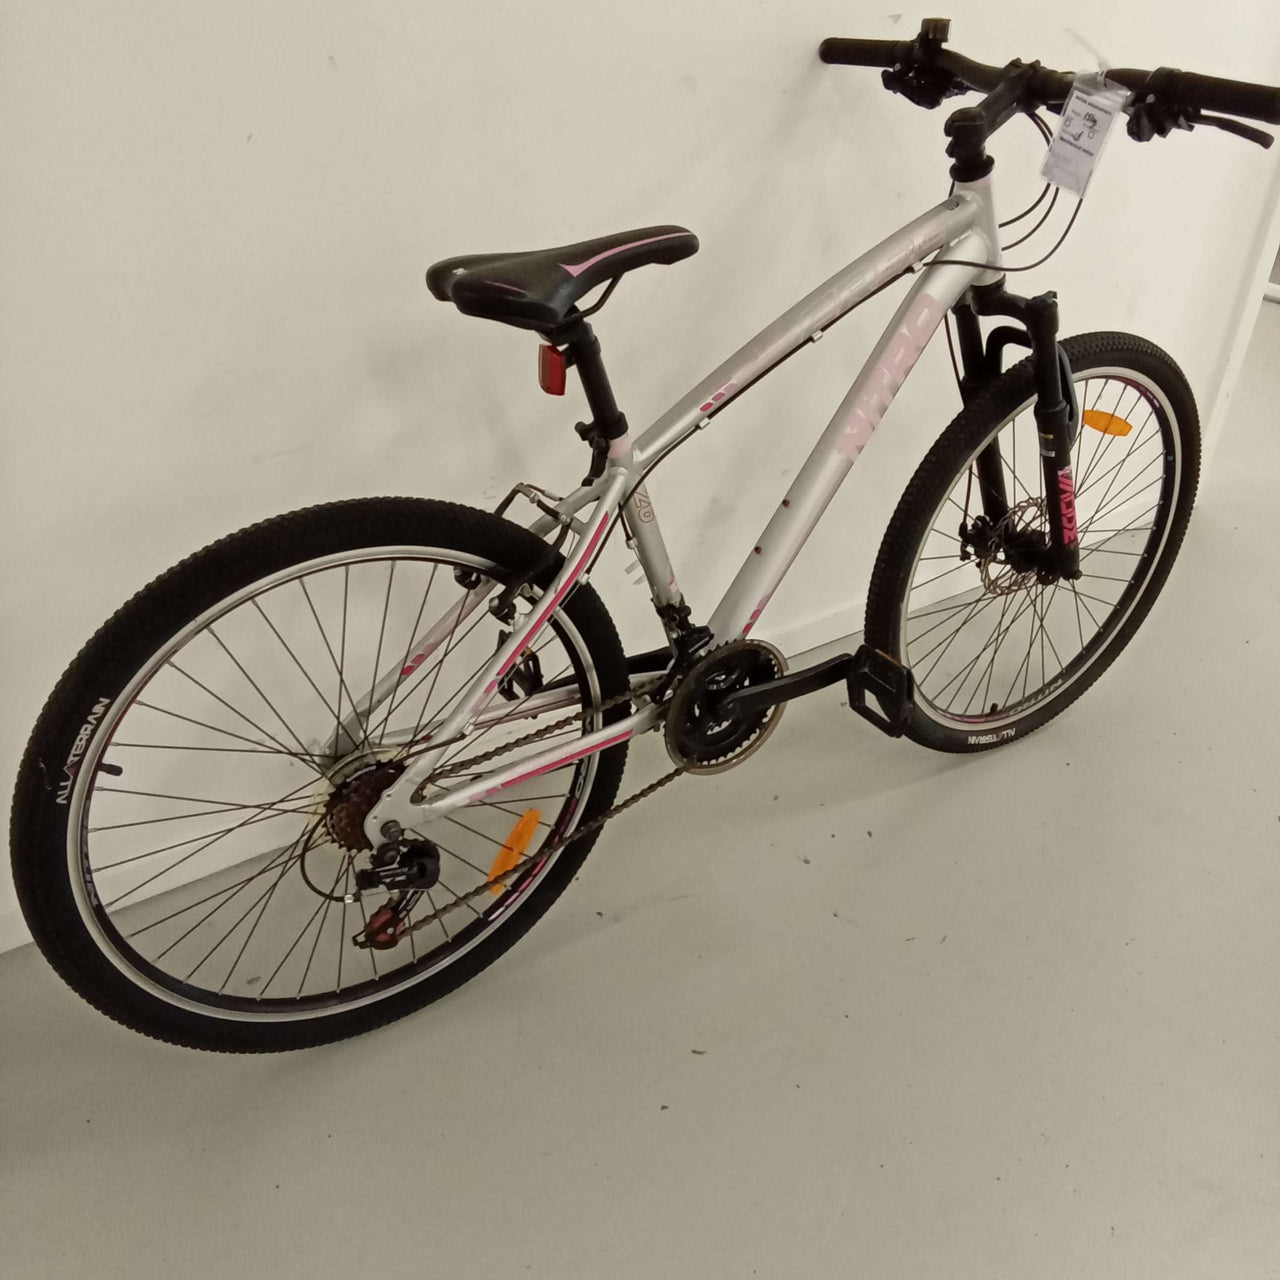 Adult - 38cm Mountain Bike with Stand, Pink-Silver